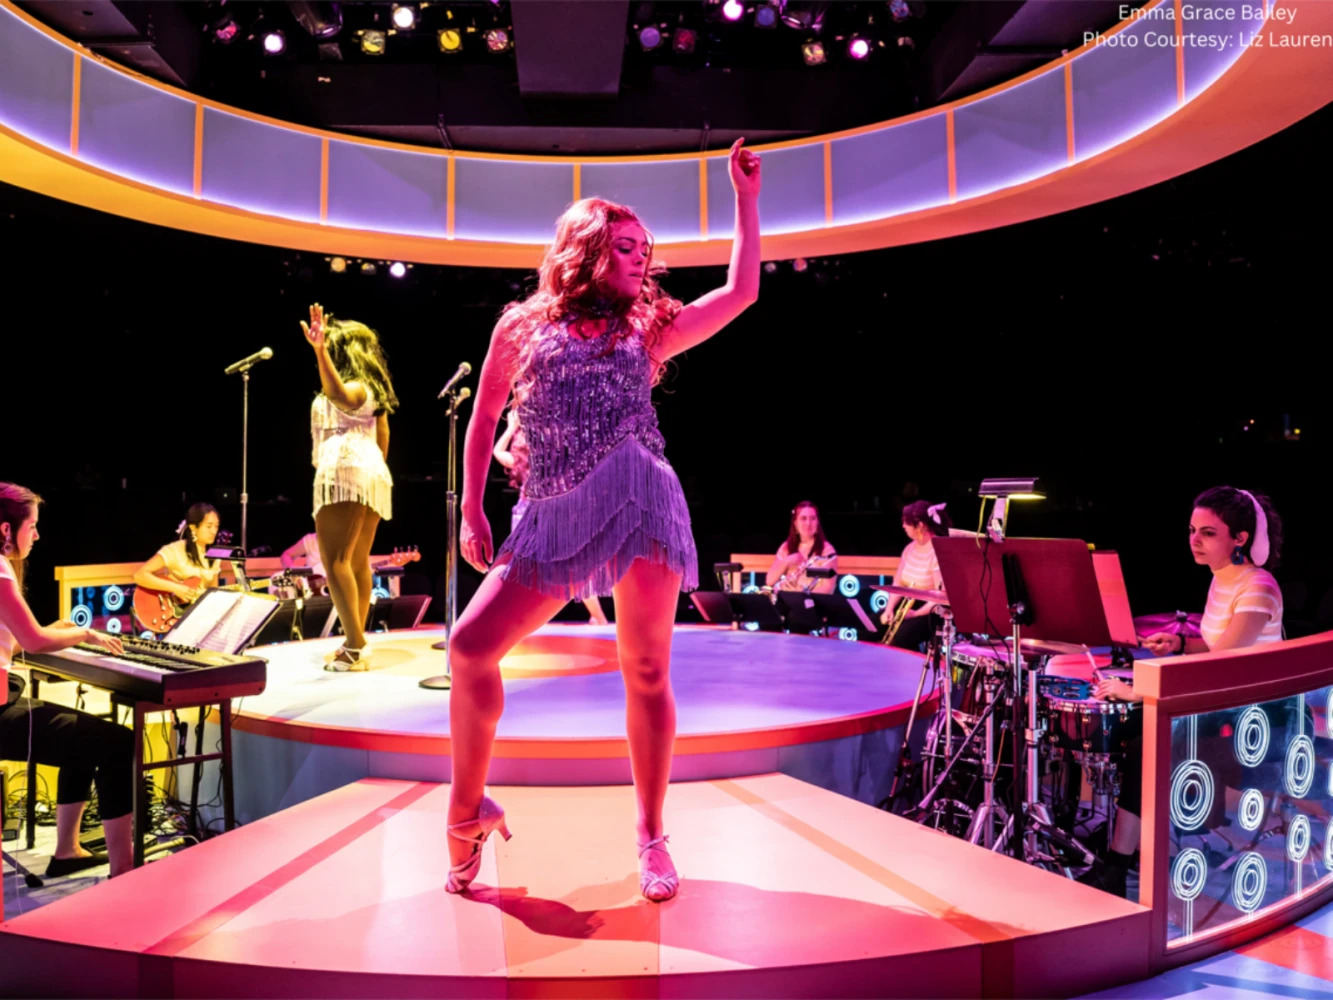 Beehive: The 60's Musical: What to expect - 3